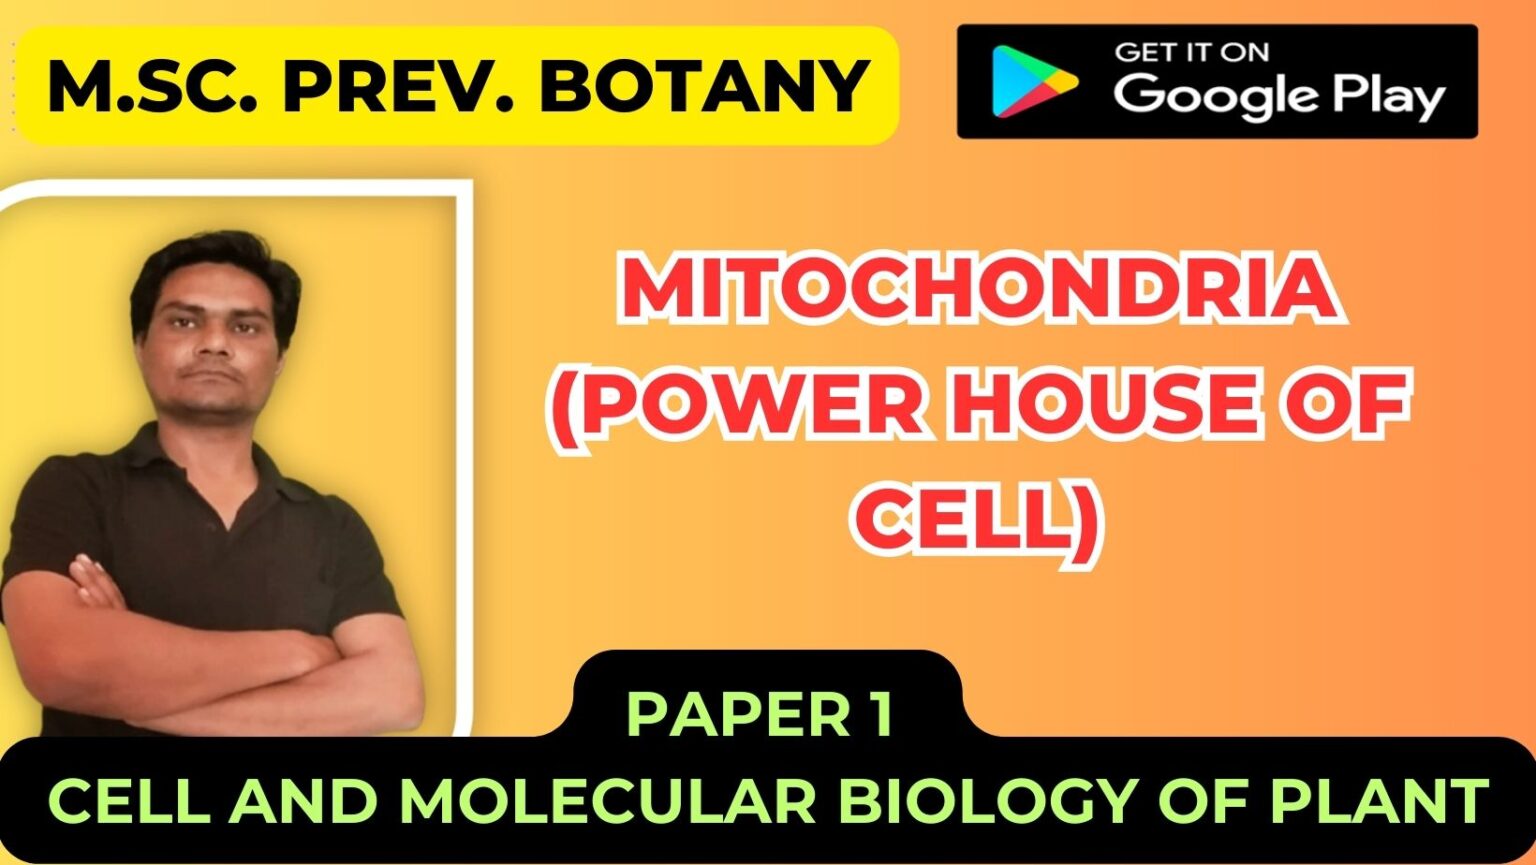 Mitochondria (Power house of cell)